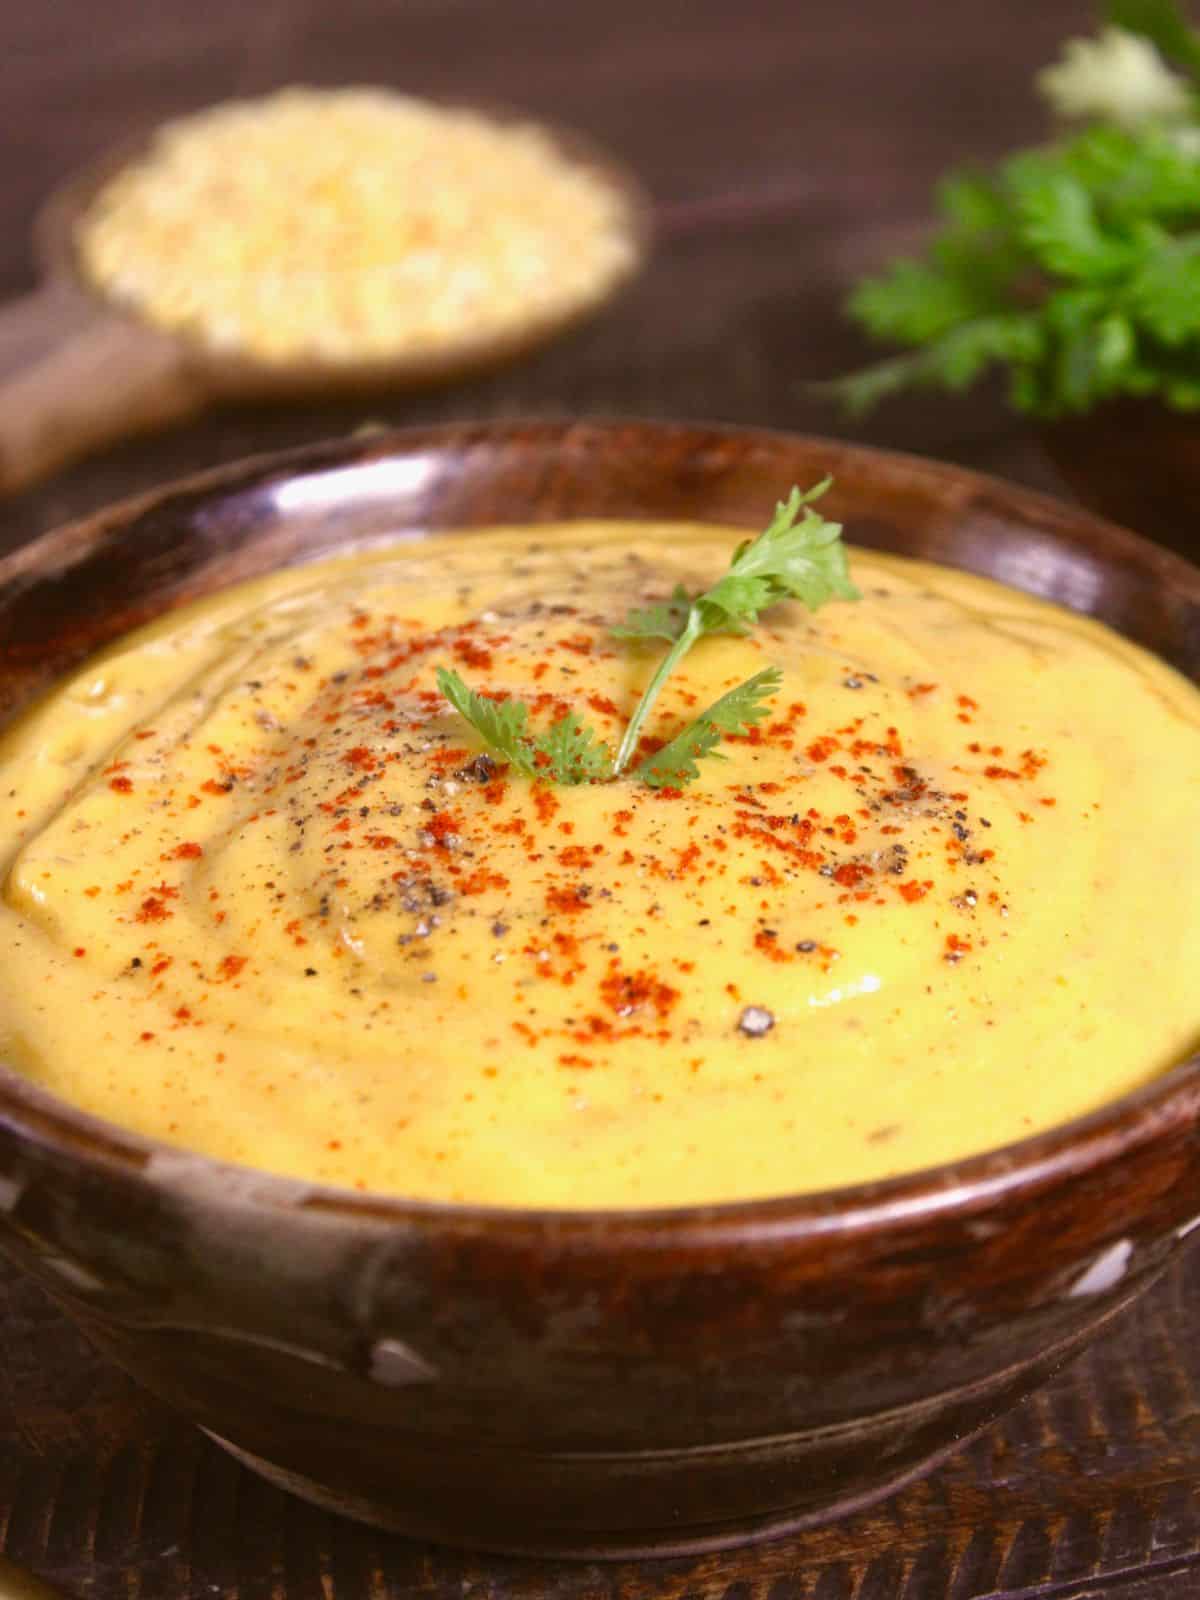 Super zoom in image of Egyptian Yellow Lentil Soup